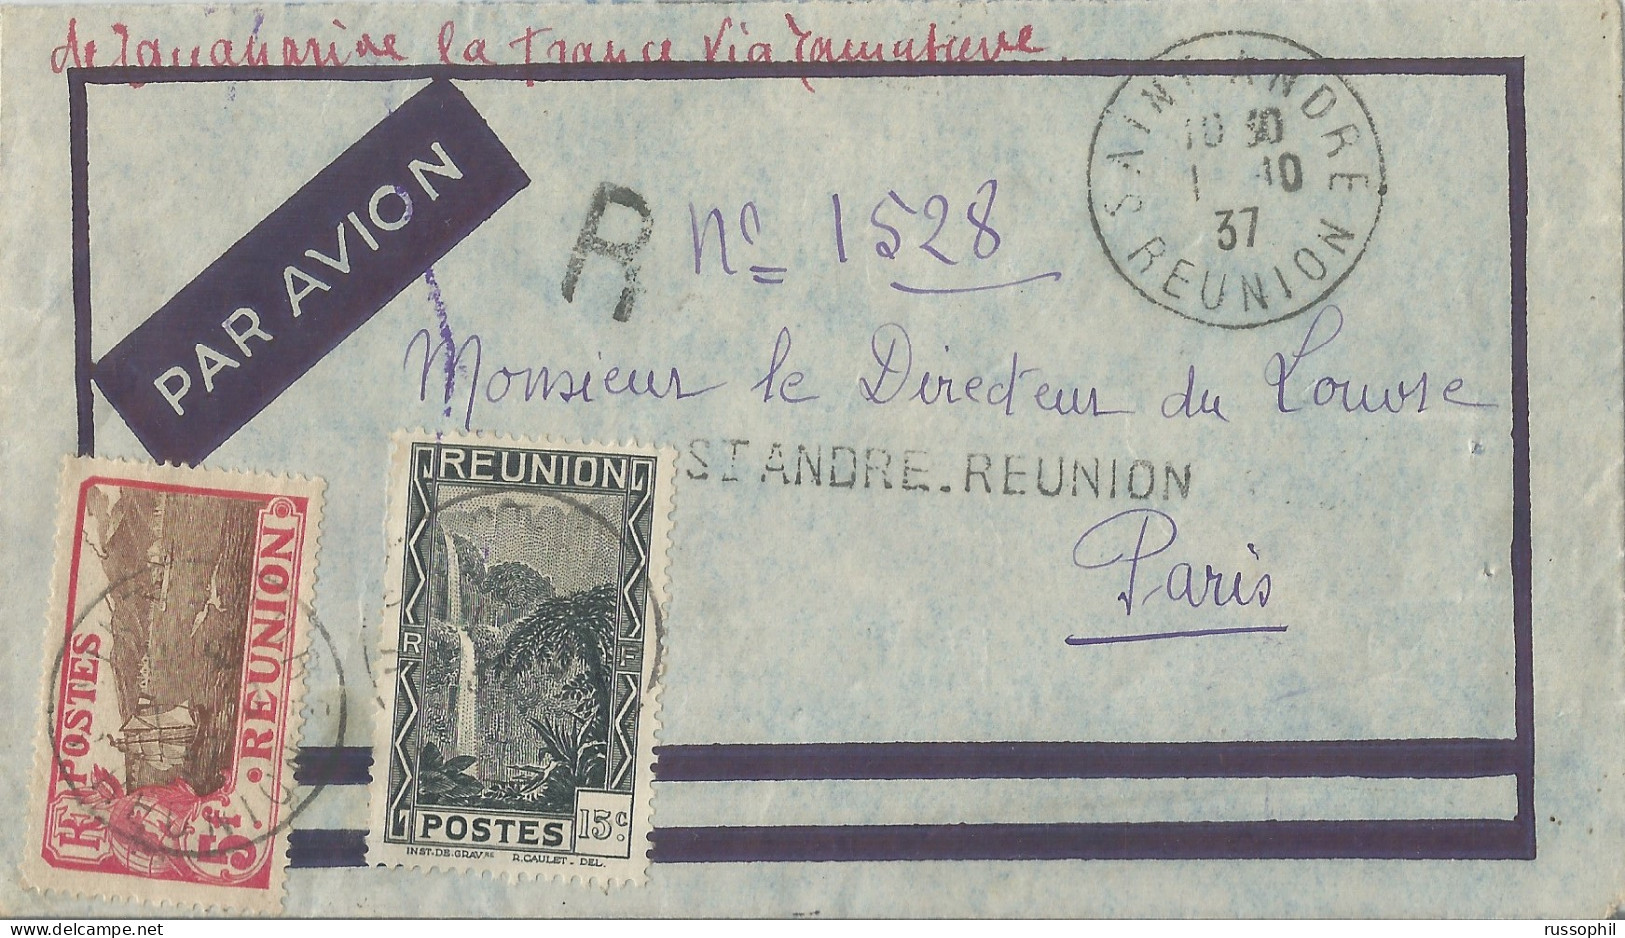 REUNION - 5 FR 15 CENT.  2 STAMP FRANKING ON REGISTERED AIR COVER FROM SAINT ANDRE TO MAINLAND FRANCE - 1937 - Covers & Documents